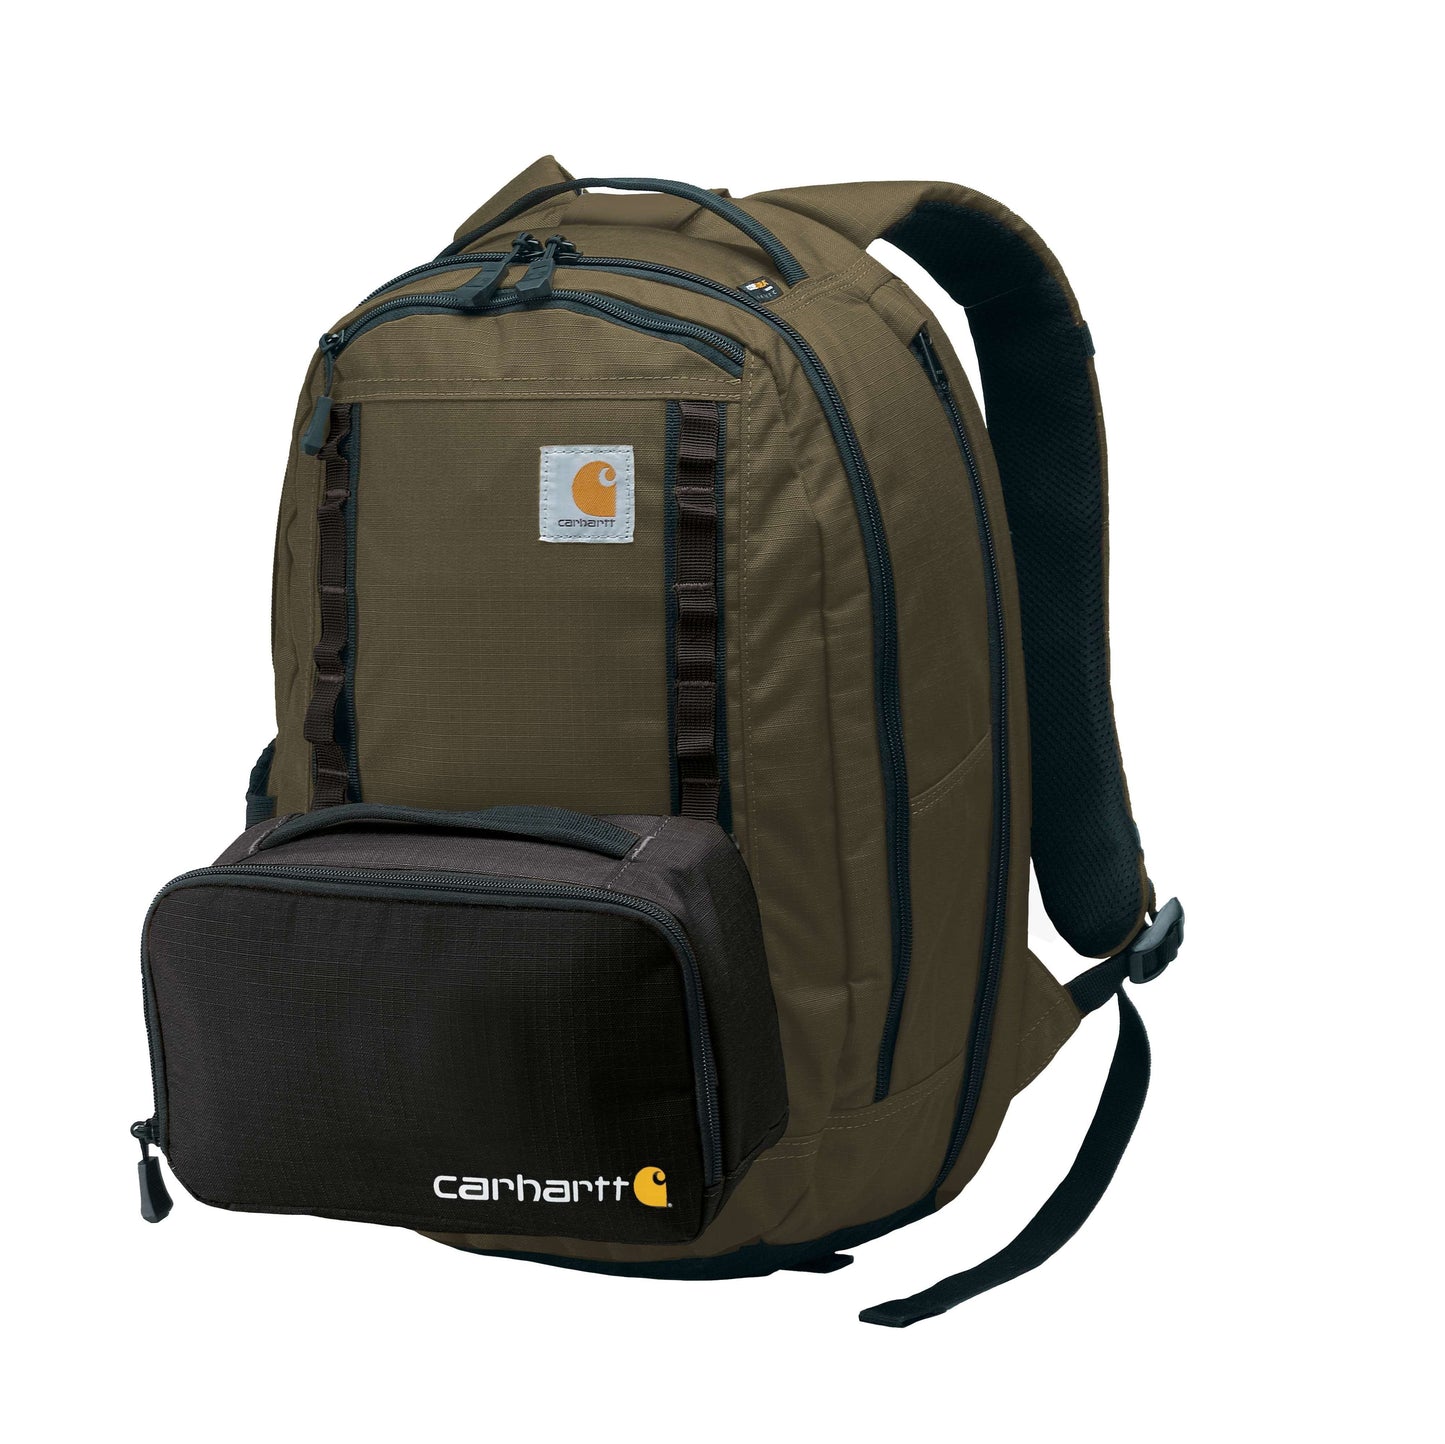 Medium Pack + 3 Can Insulated Cooler